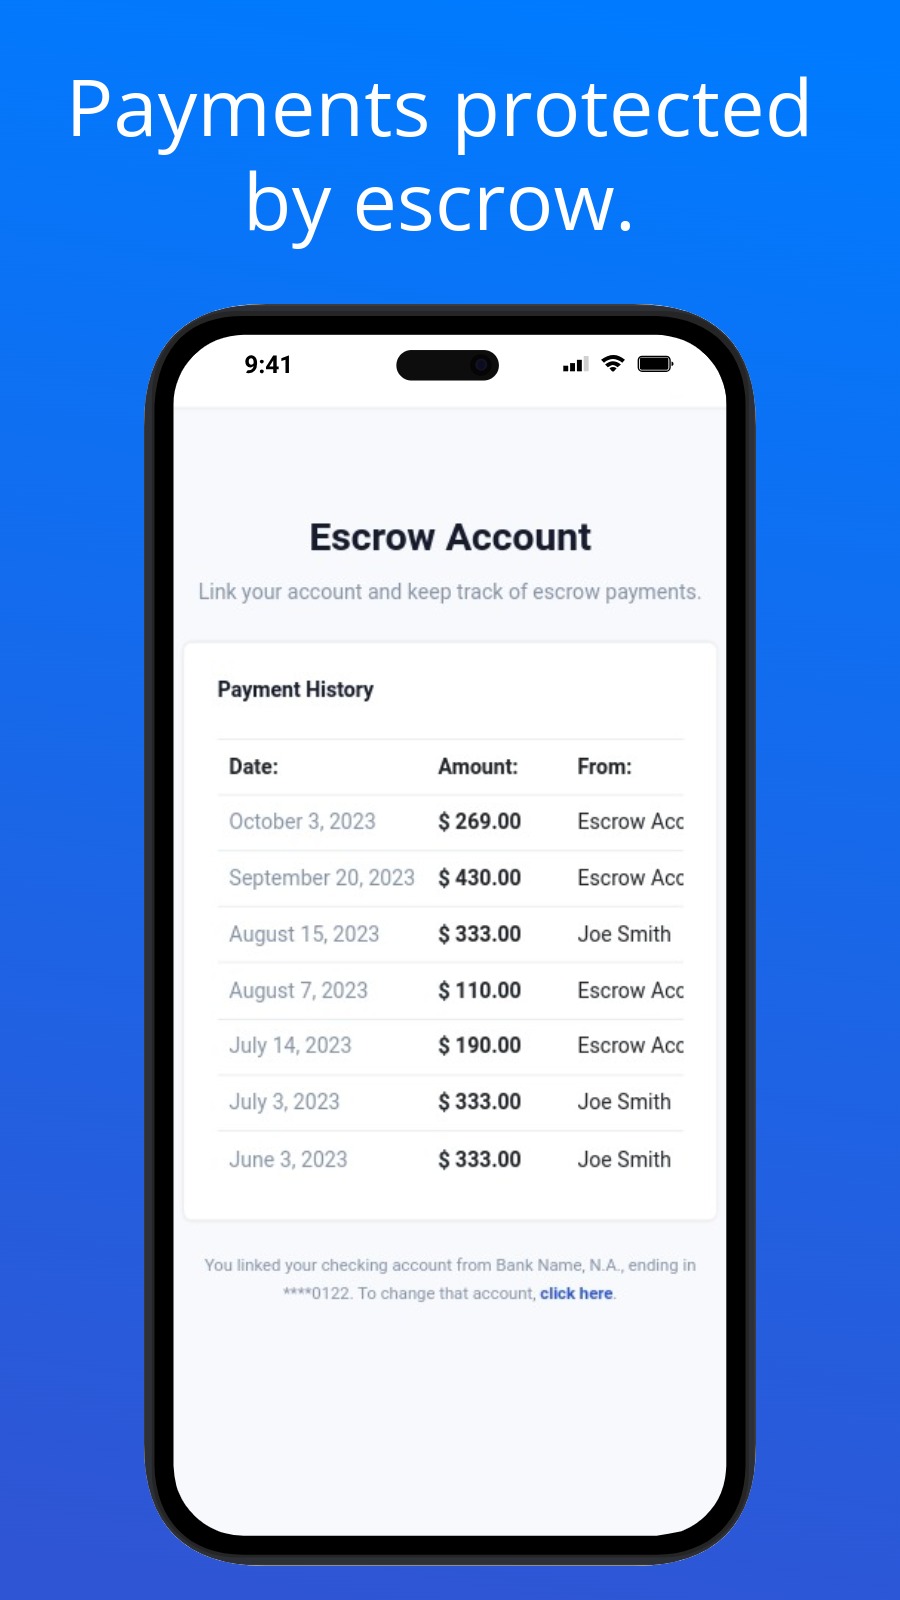 Payments protected by escrow.